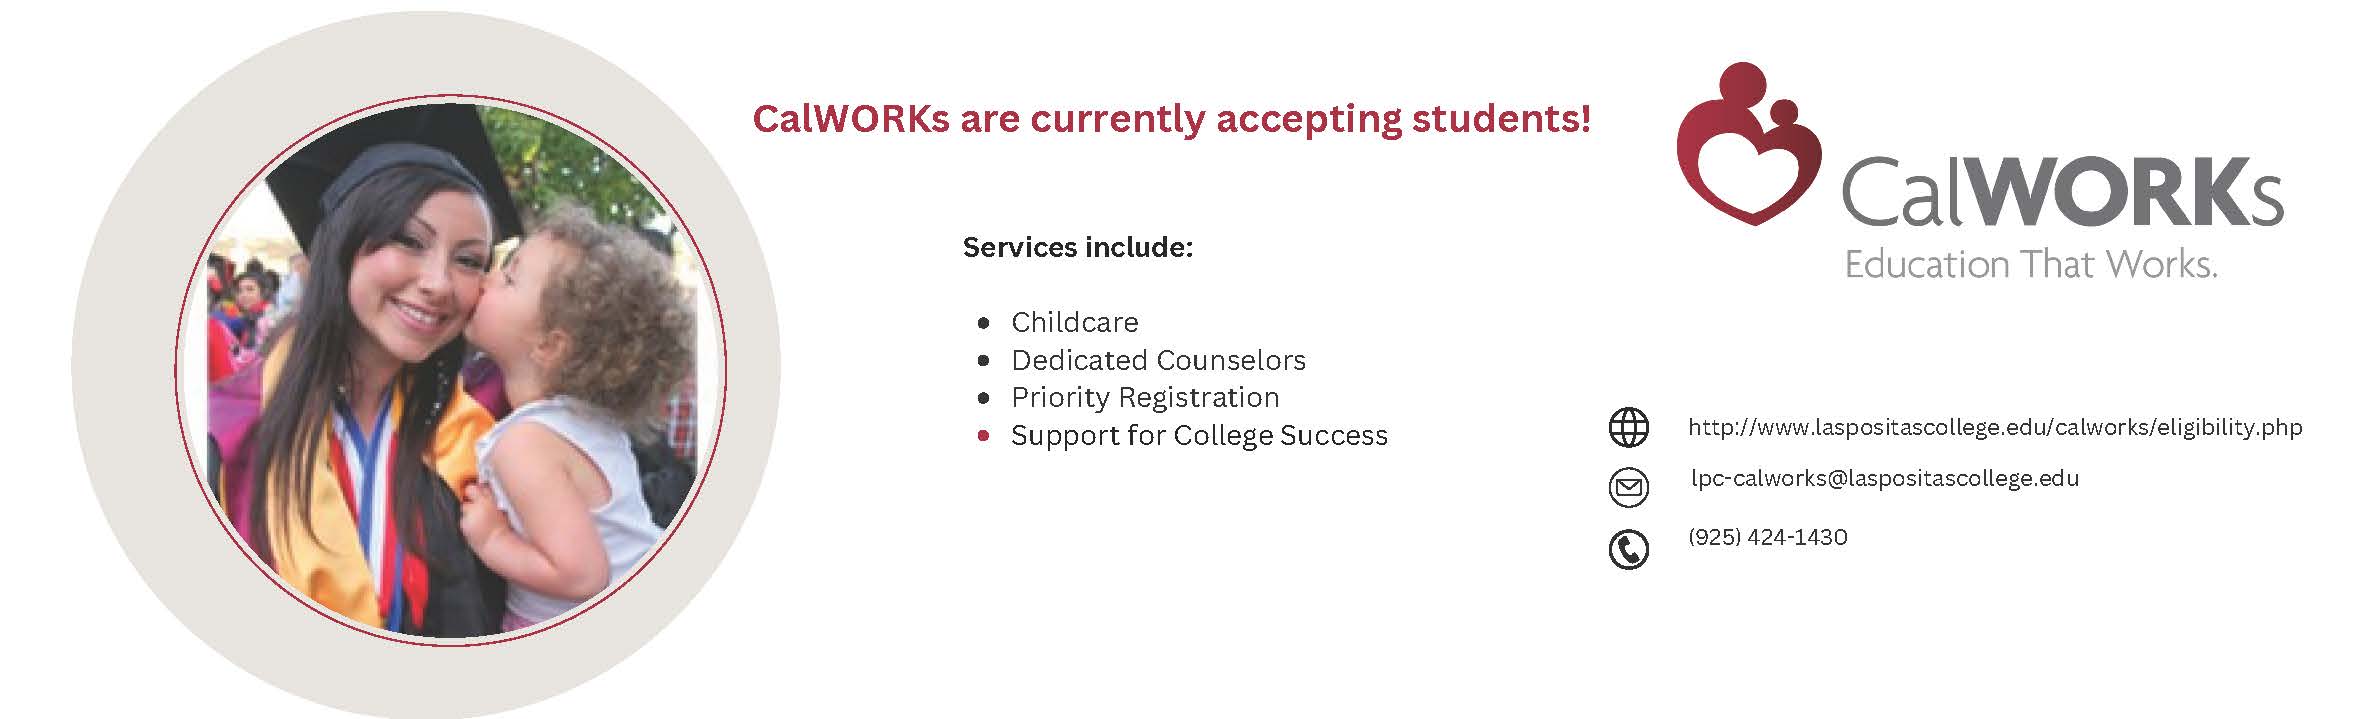 CalWORKs is currently accepting students!